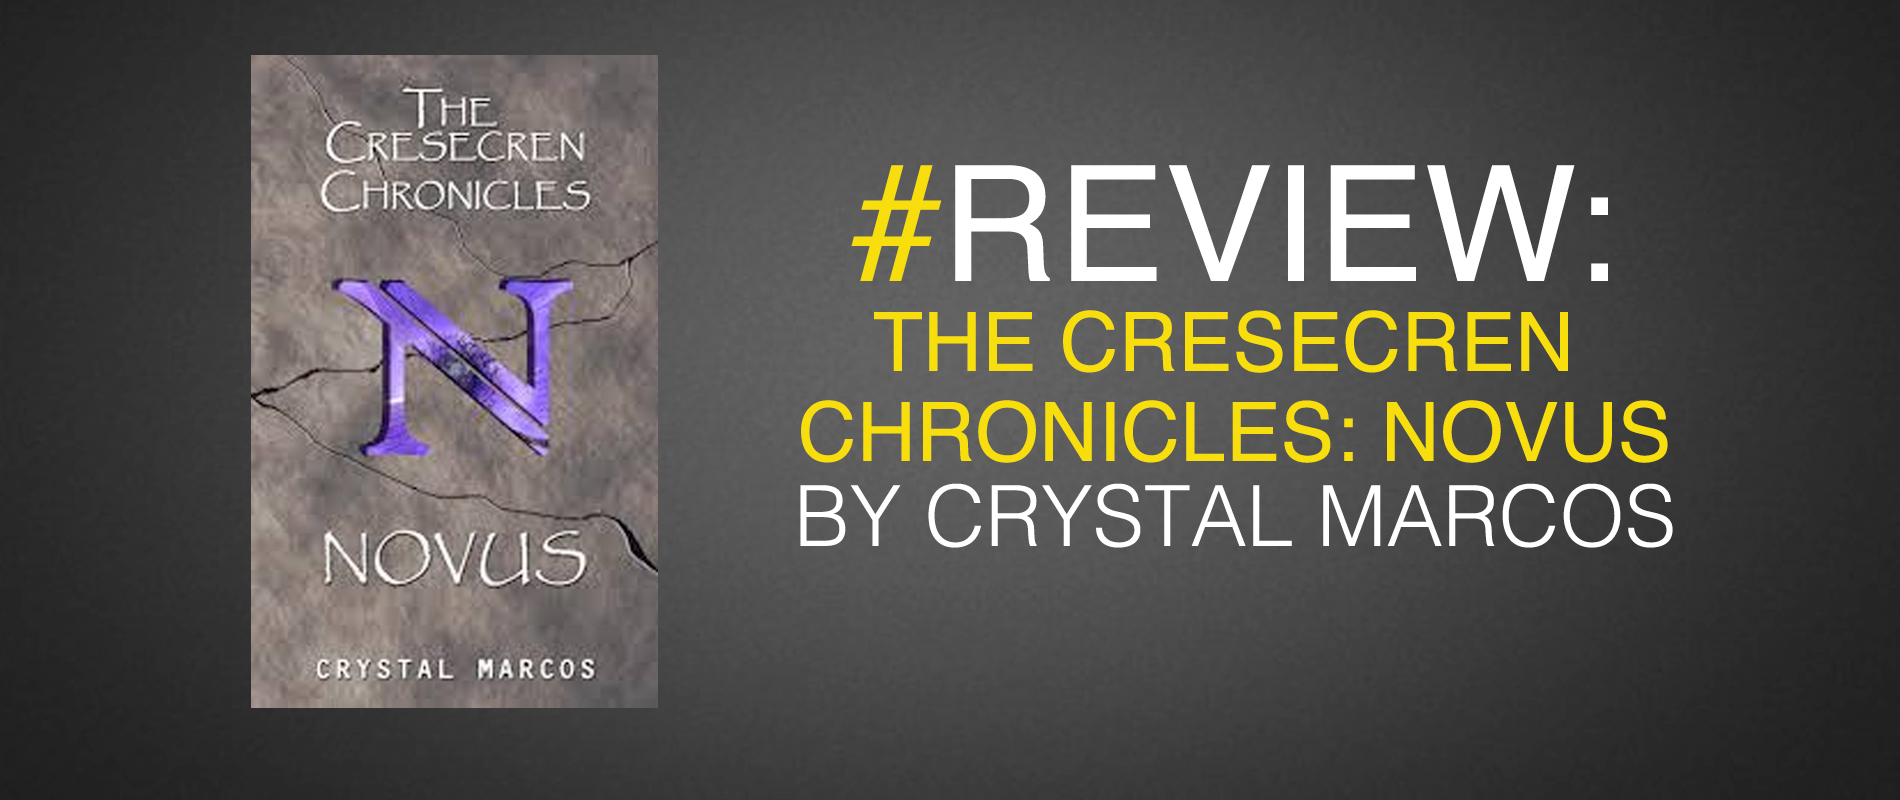 The Cresecren Chronicles: Novus by Crystal Marcos